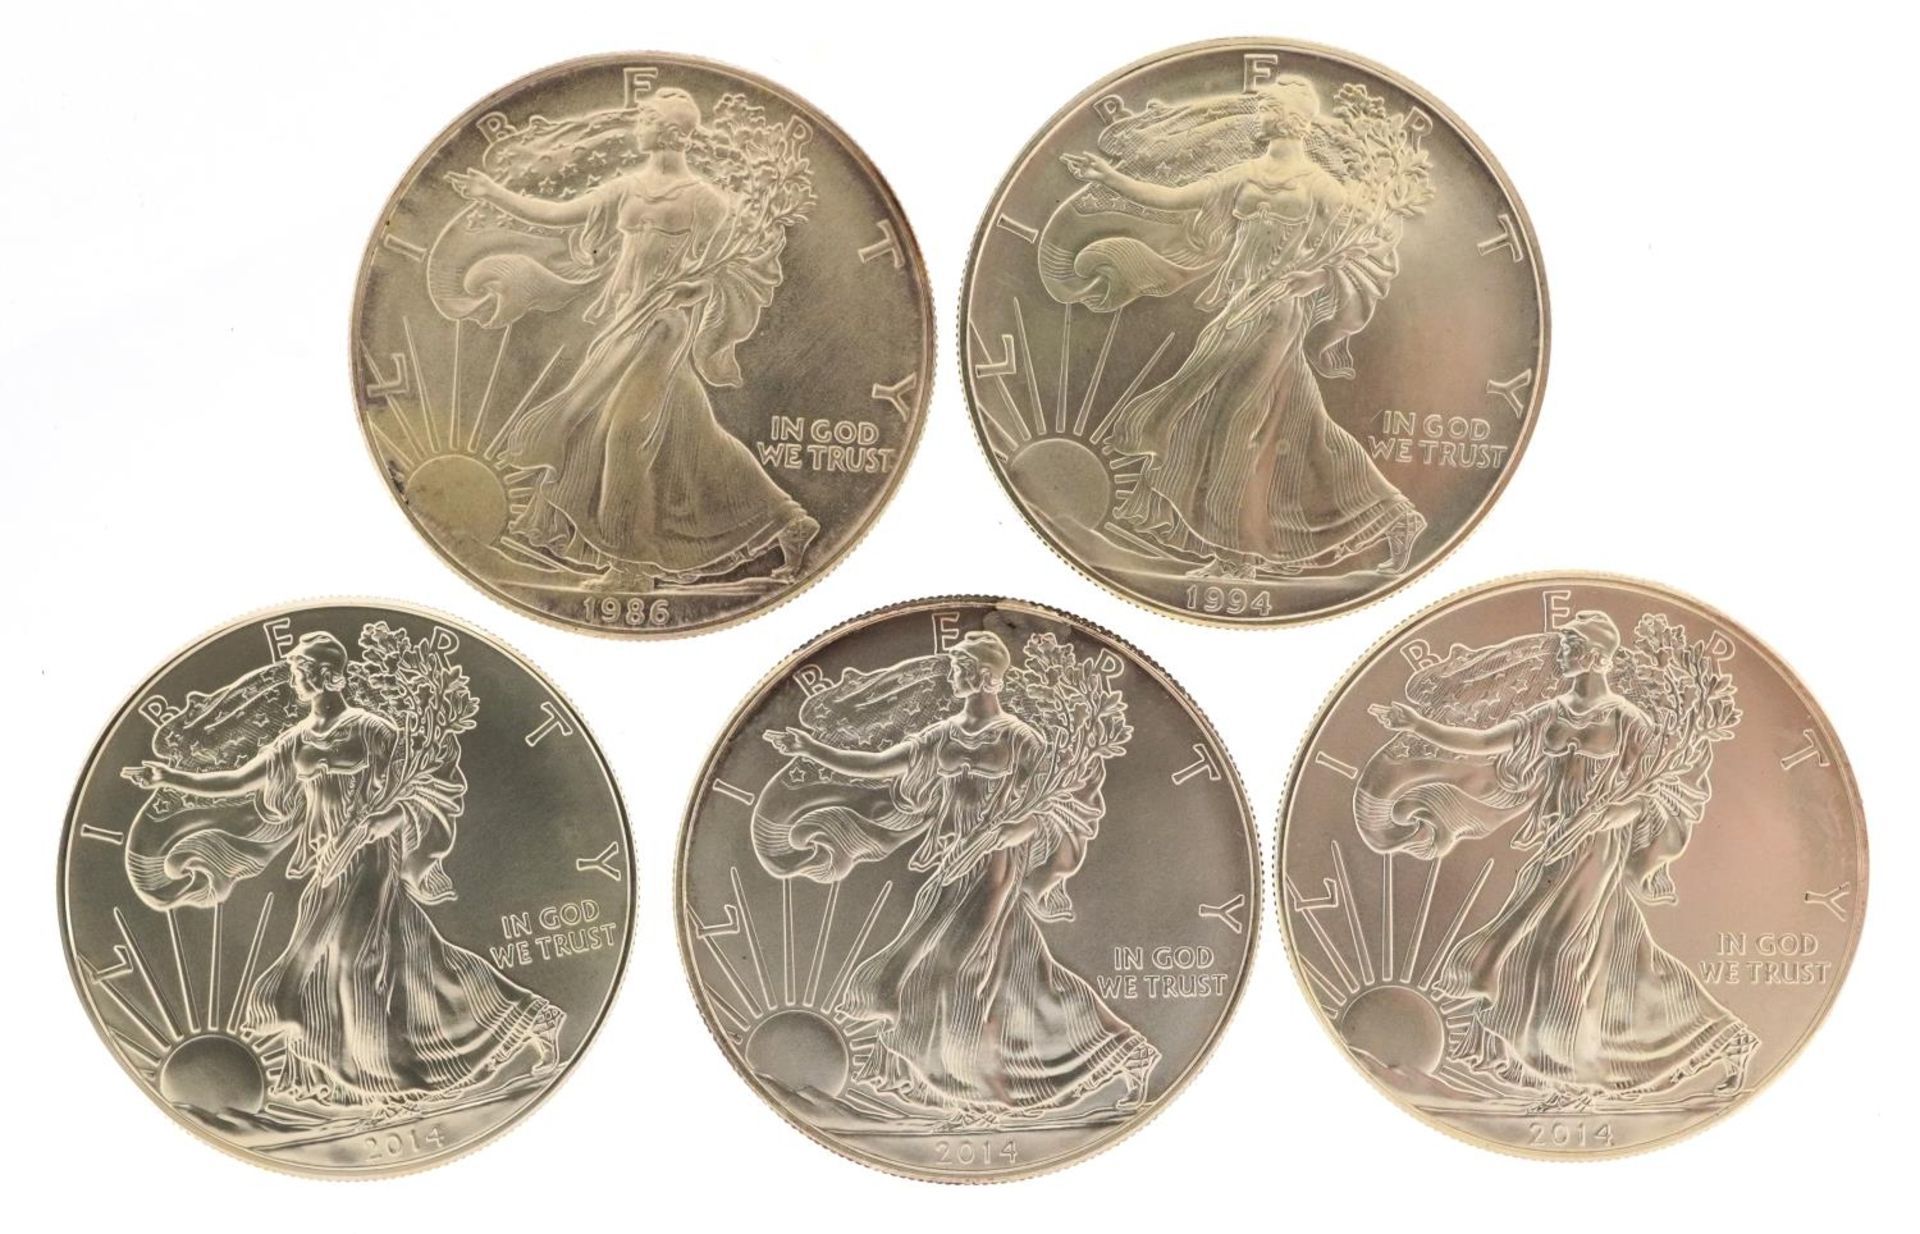 Five United States of America one ounce silver dollars comprising dates 1986, 1994, 2014, 2014 and